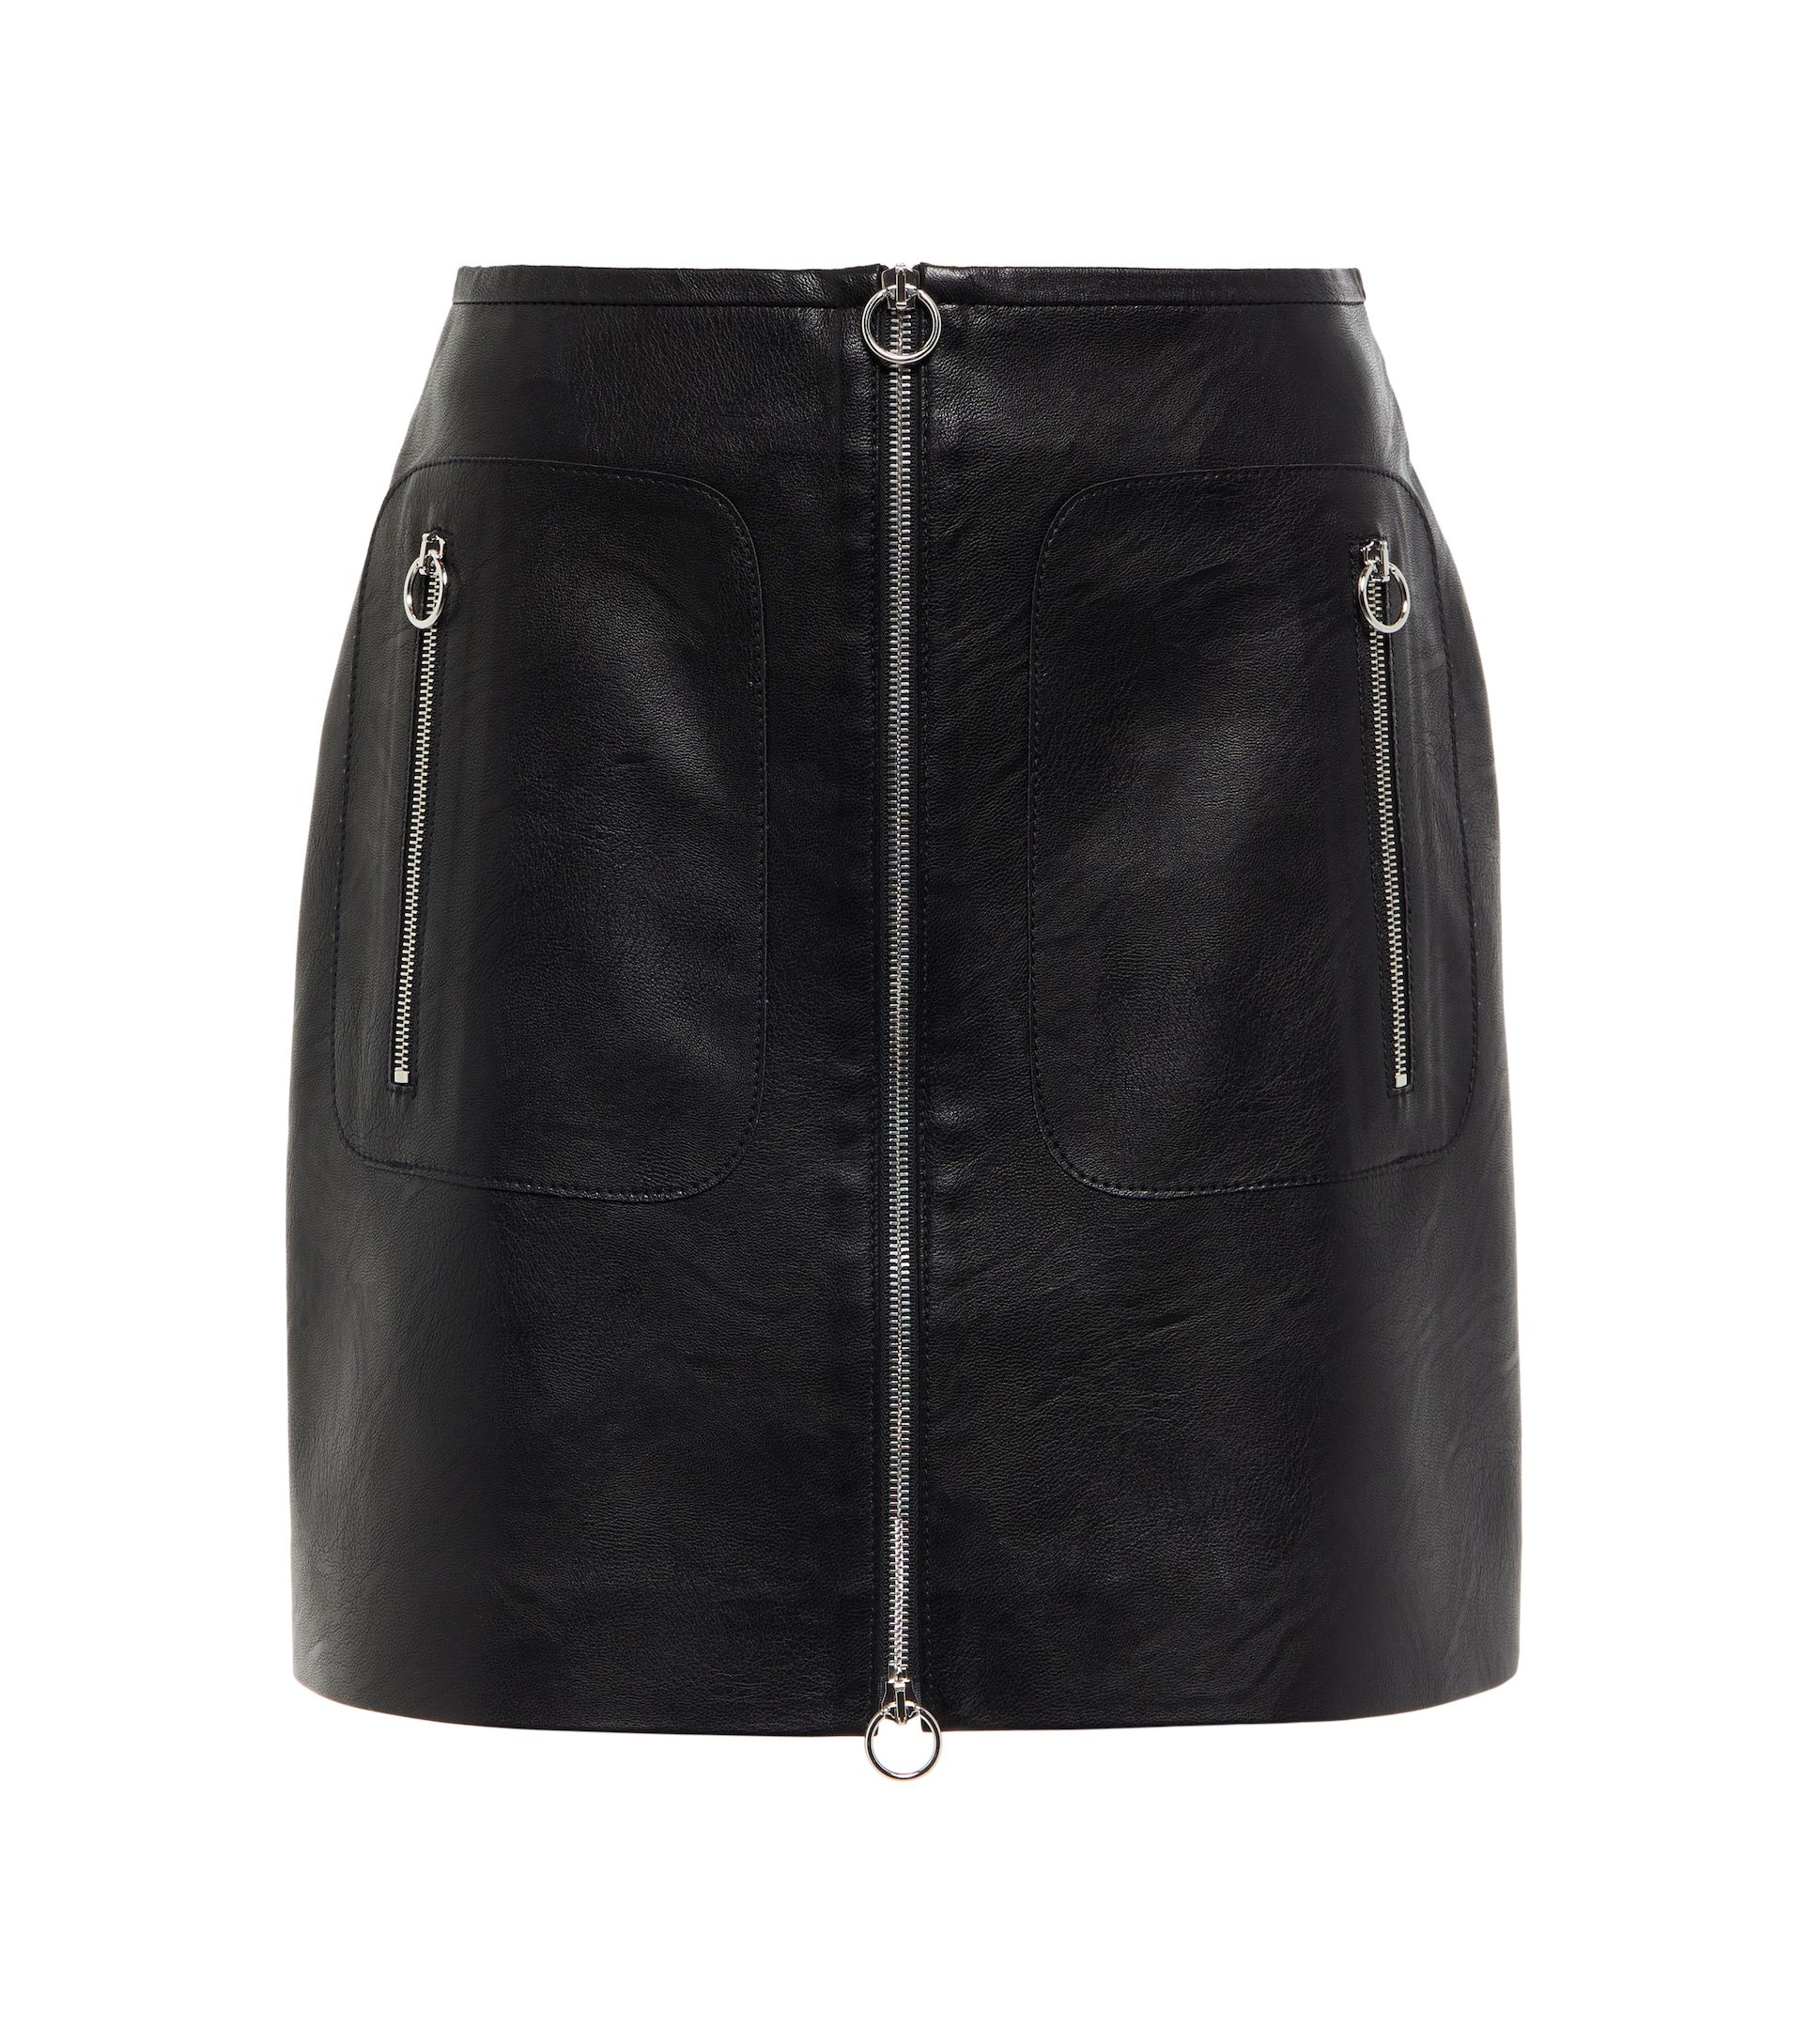 10 best leather skirts to buy for winter 2022